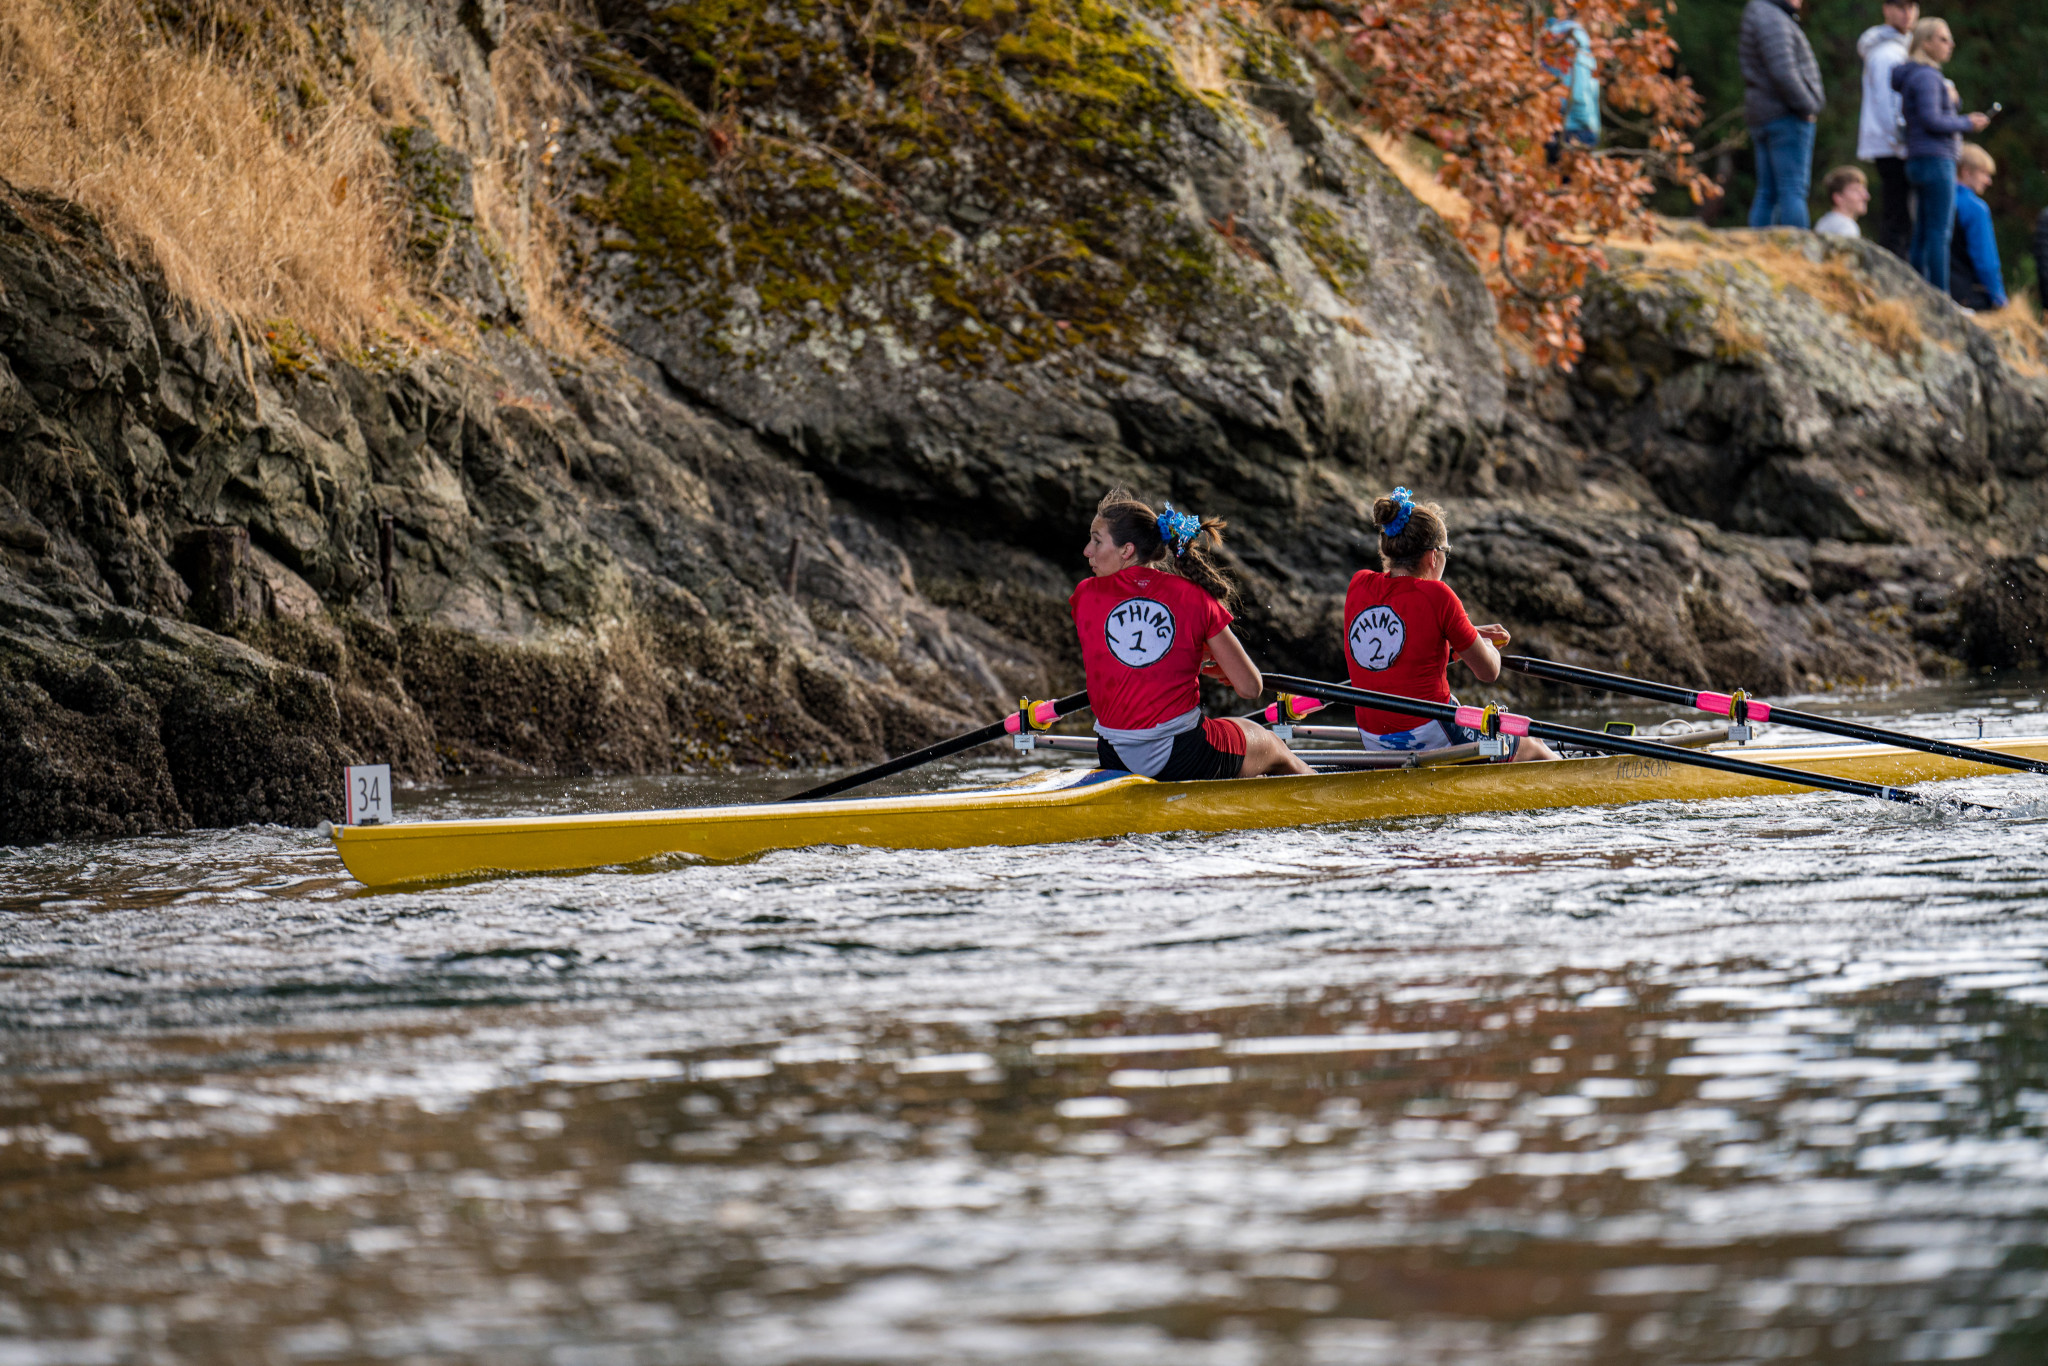 Rowers dressed as Thing1 and Thing2 from Dr. Seuss going through the Tillicum Narrows.